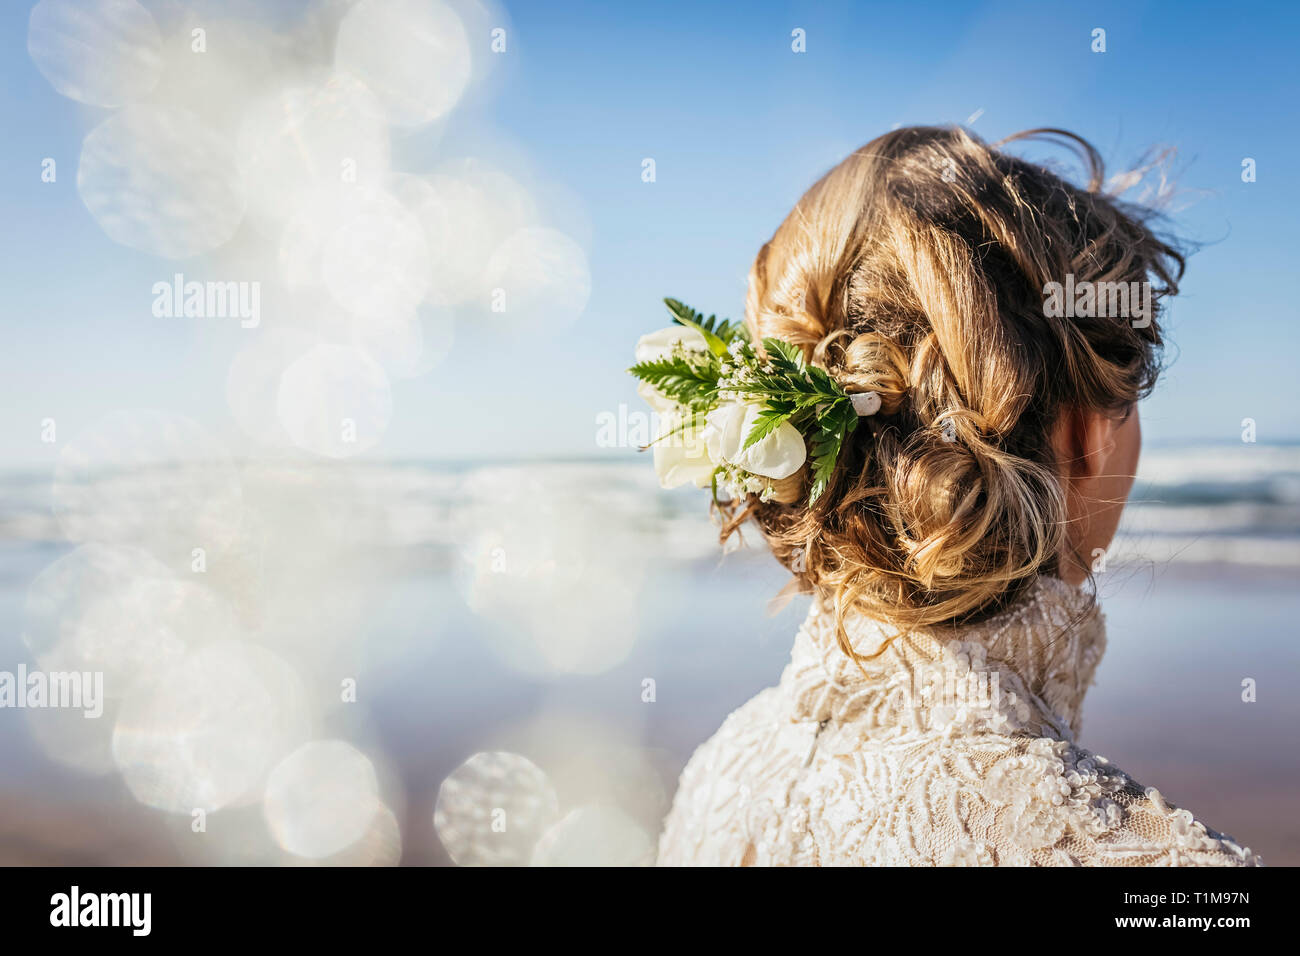 Blonde bride with flowers in hair on sunny beach Stock Photo